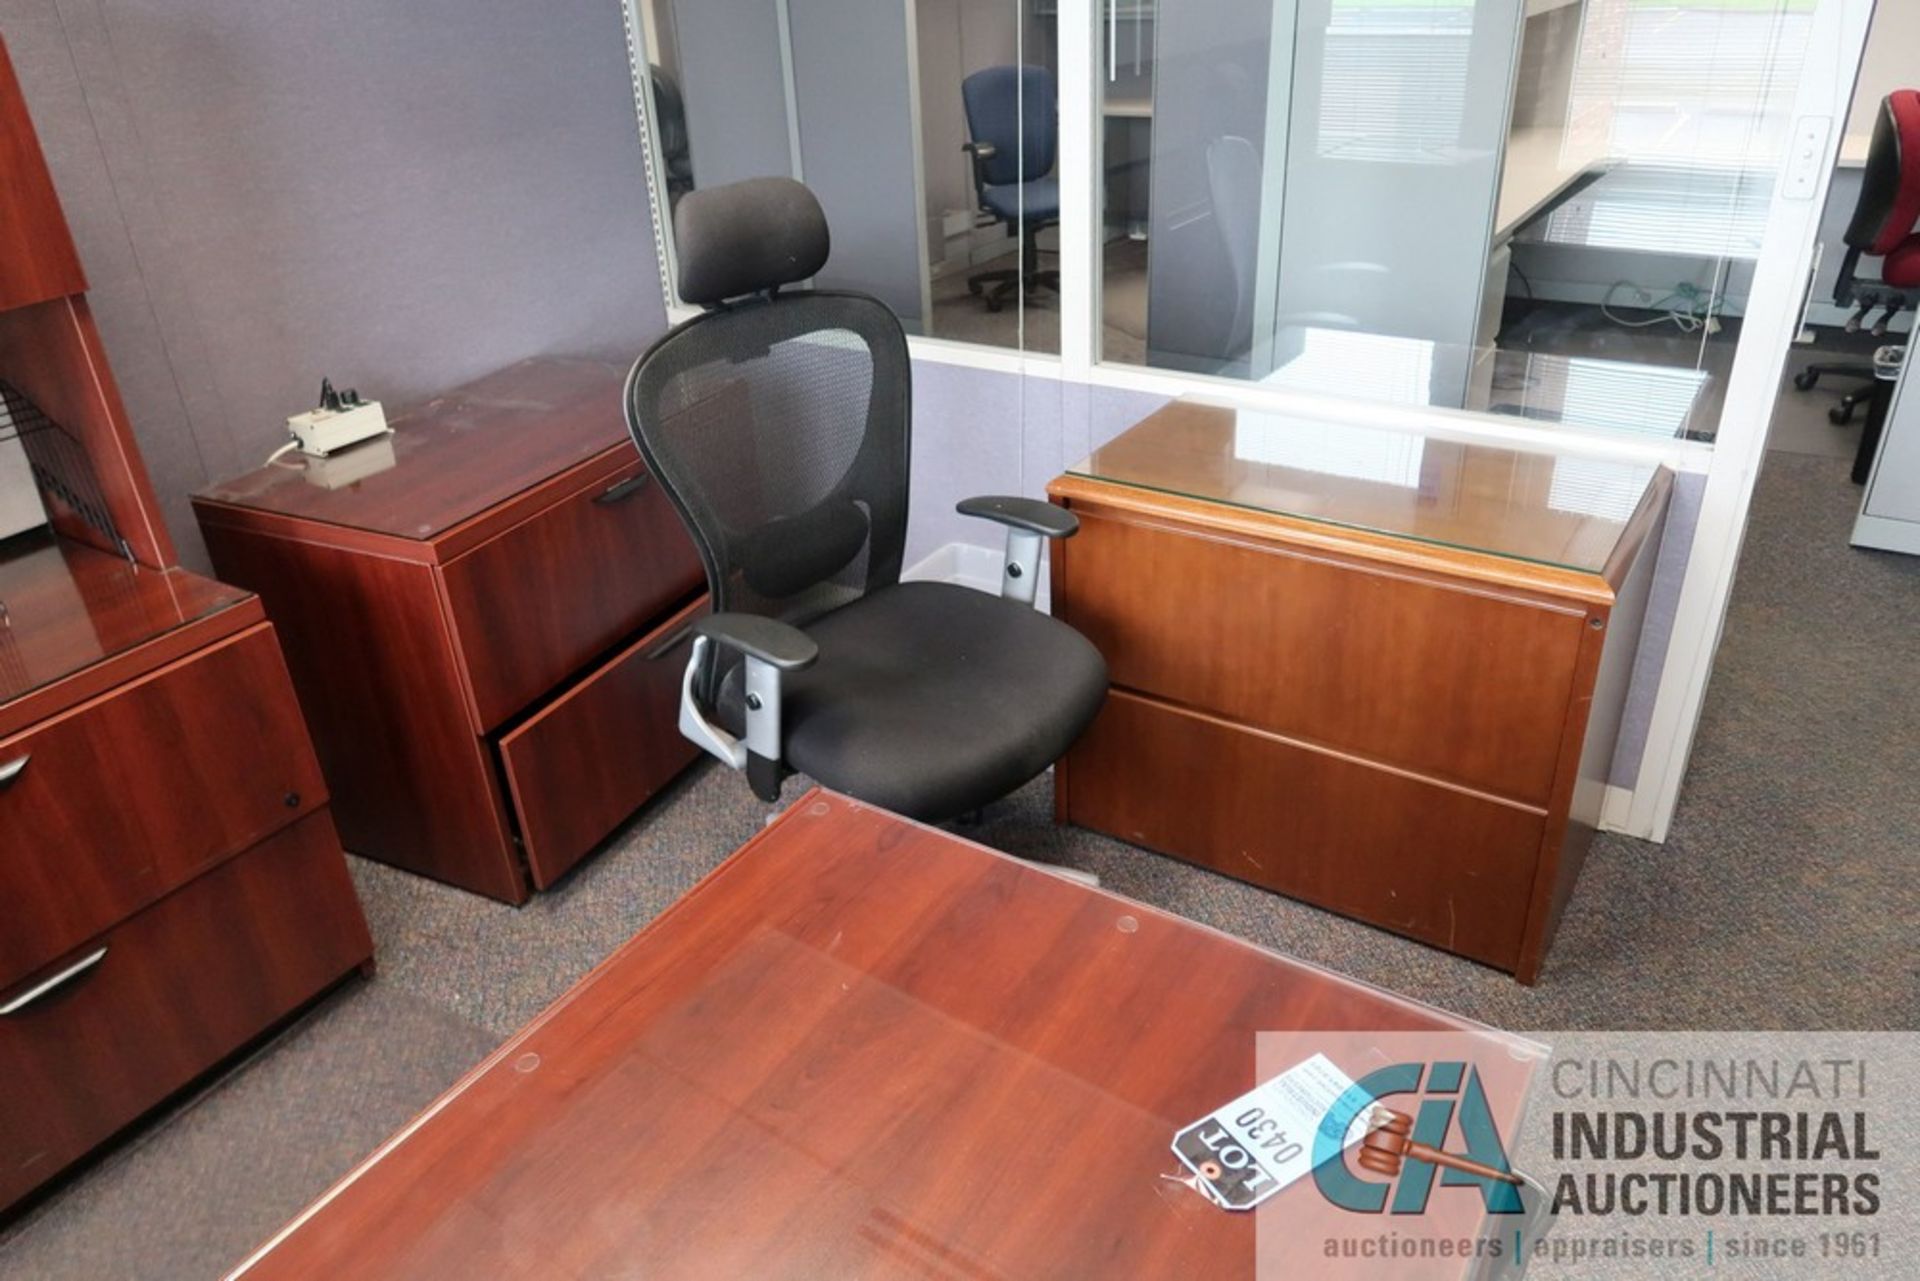 (LOT) EXECUTIVE OFFICE WITH U-SHAPED DESK, (2) 2-DRAWER CABINETS, COFFEE TABLE, (3) CHAIRS - Image 3 of 4